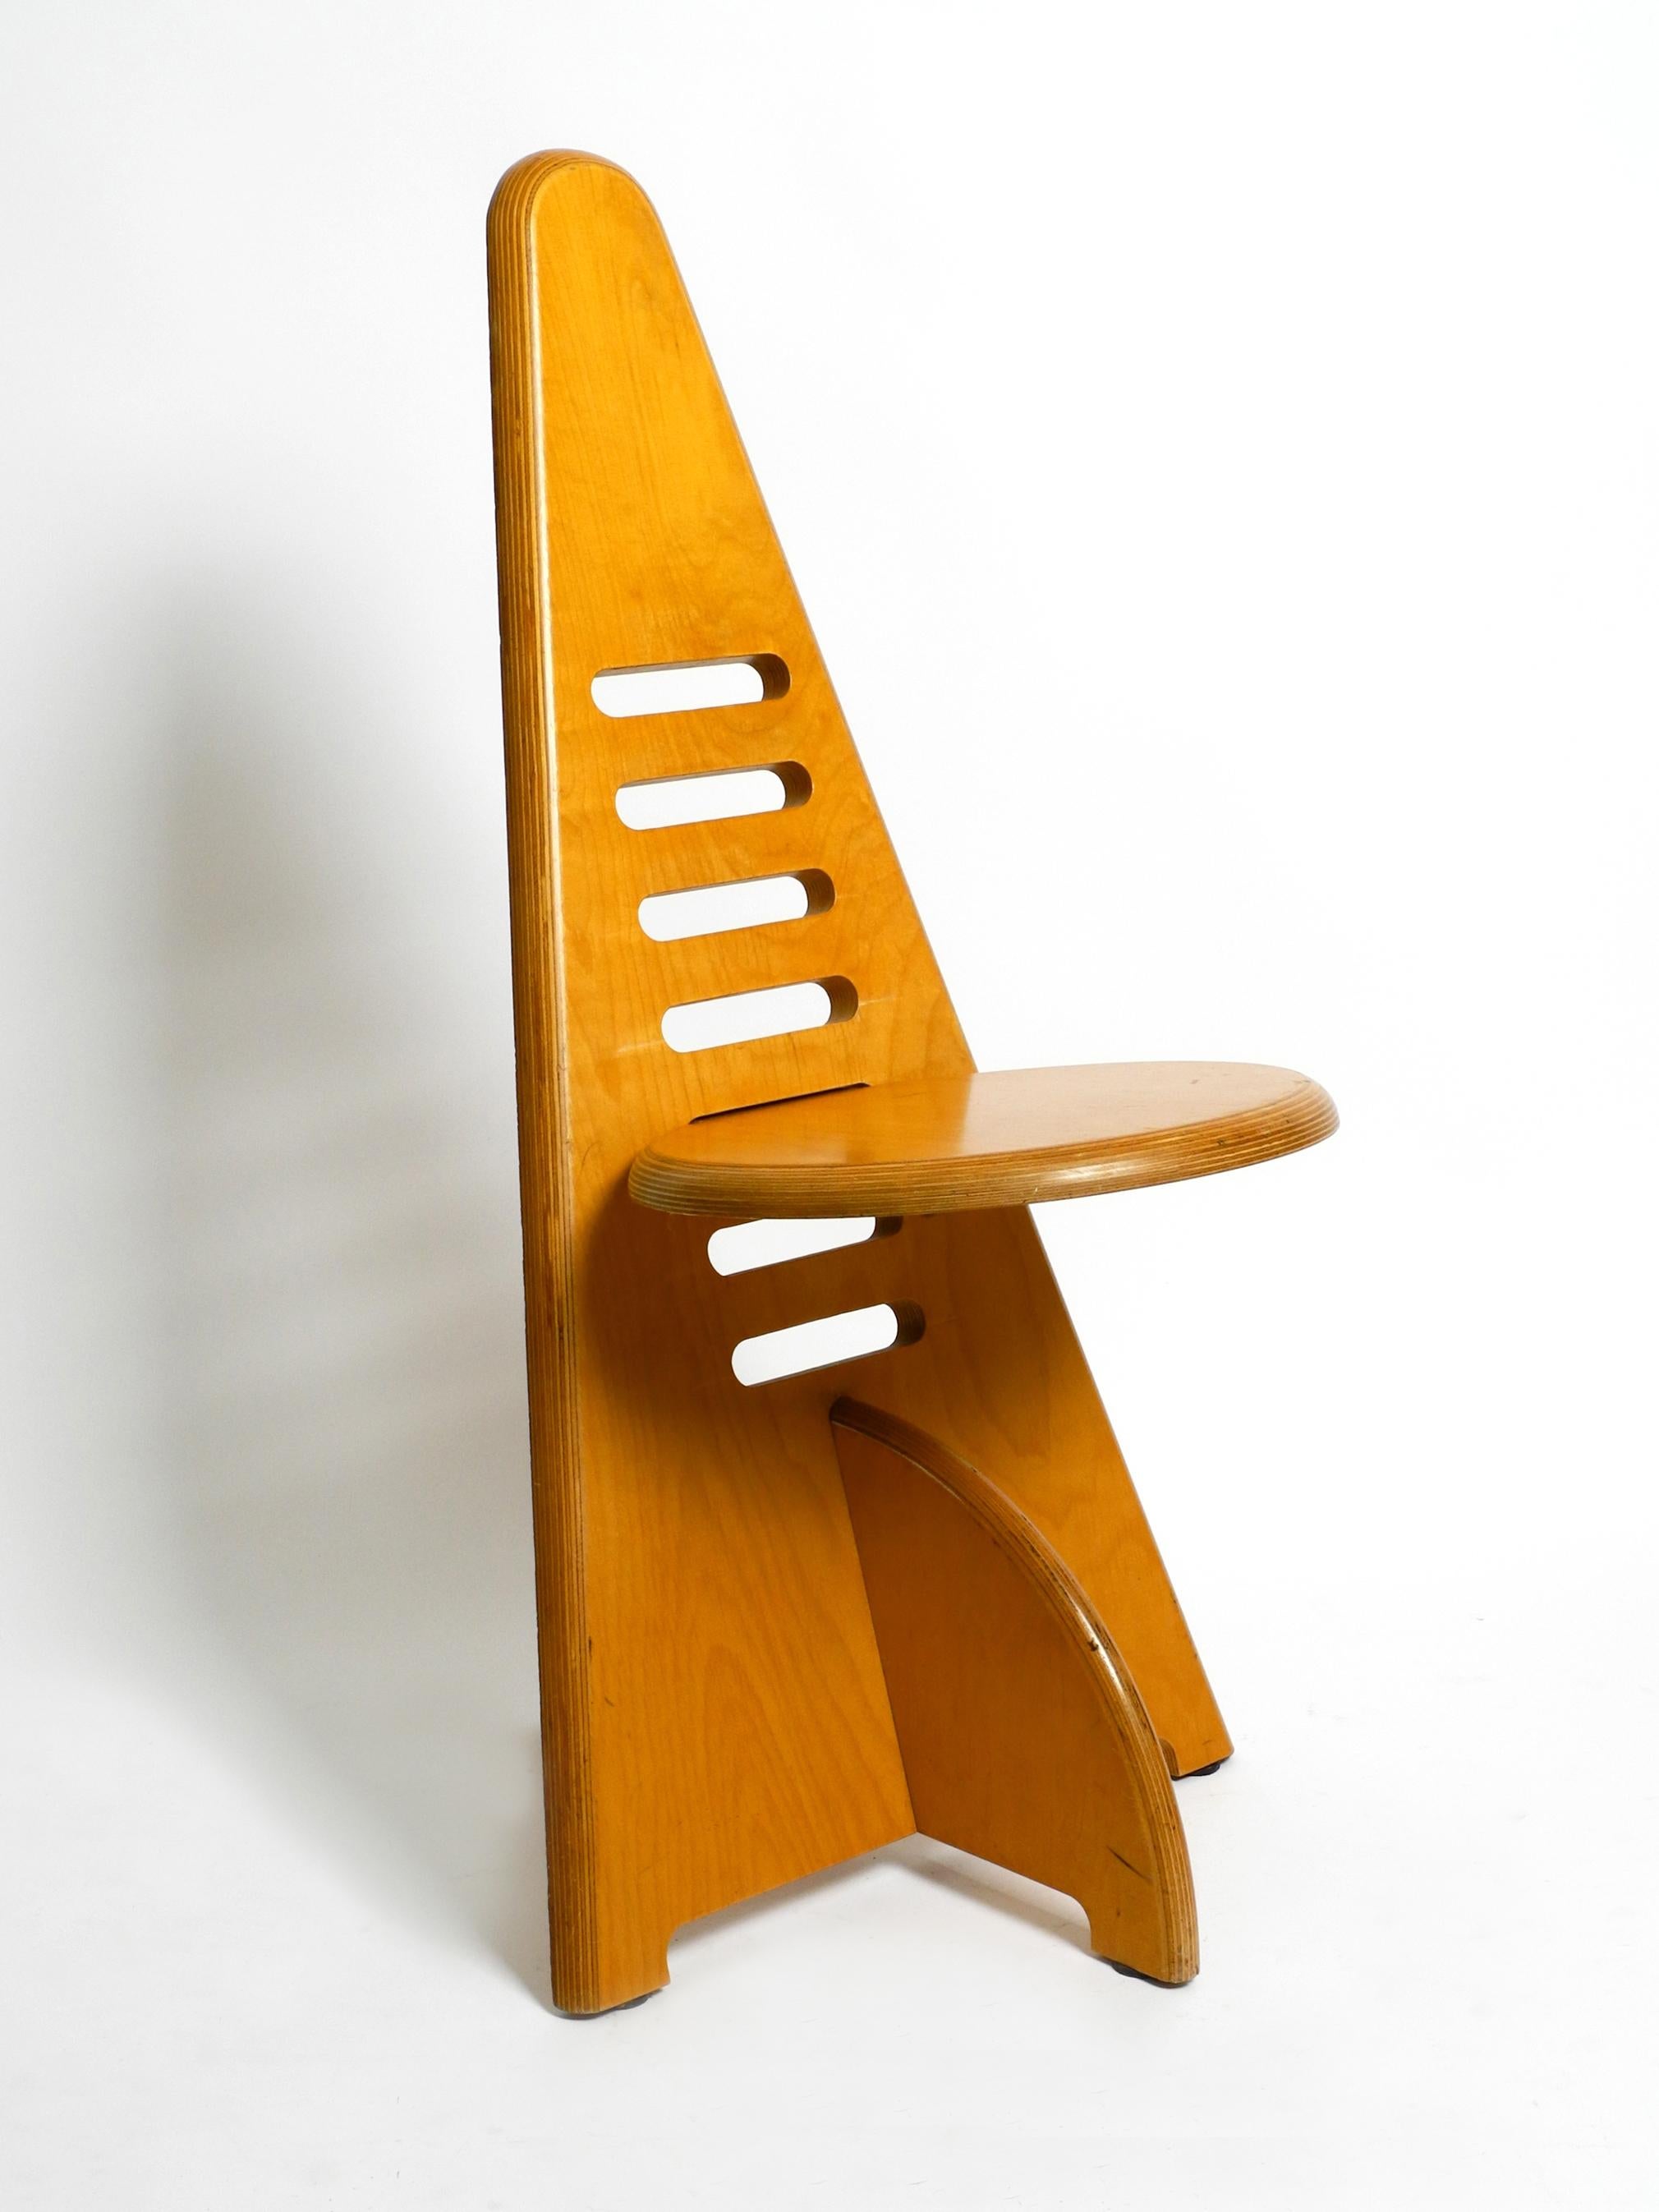 Beautiful 1970s Lundi Sit Chair Designed by Gijs Boelaars for Lundia Netherlands 10